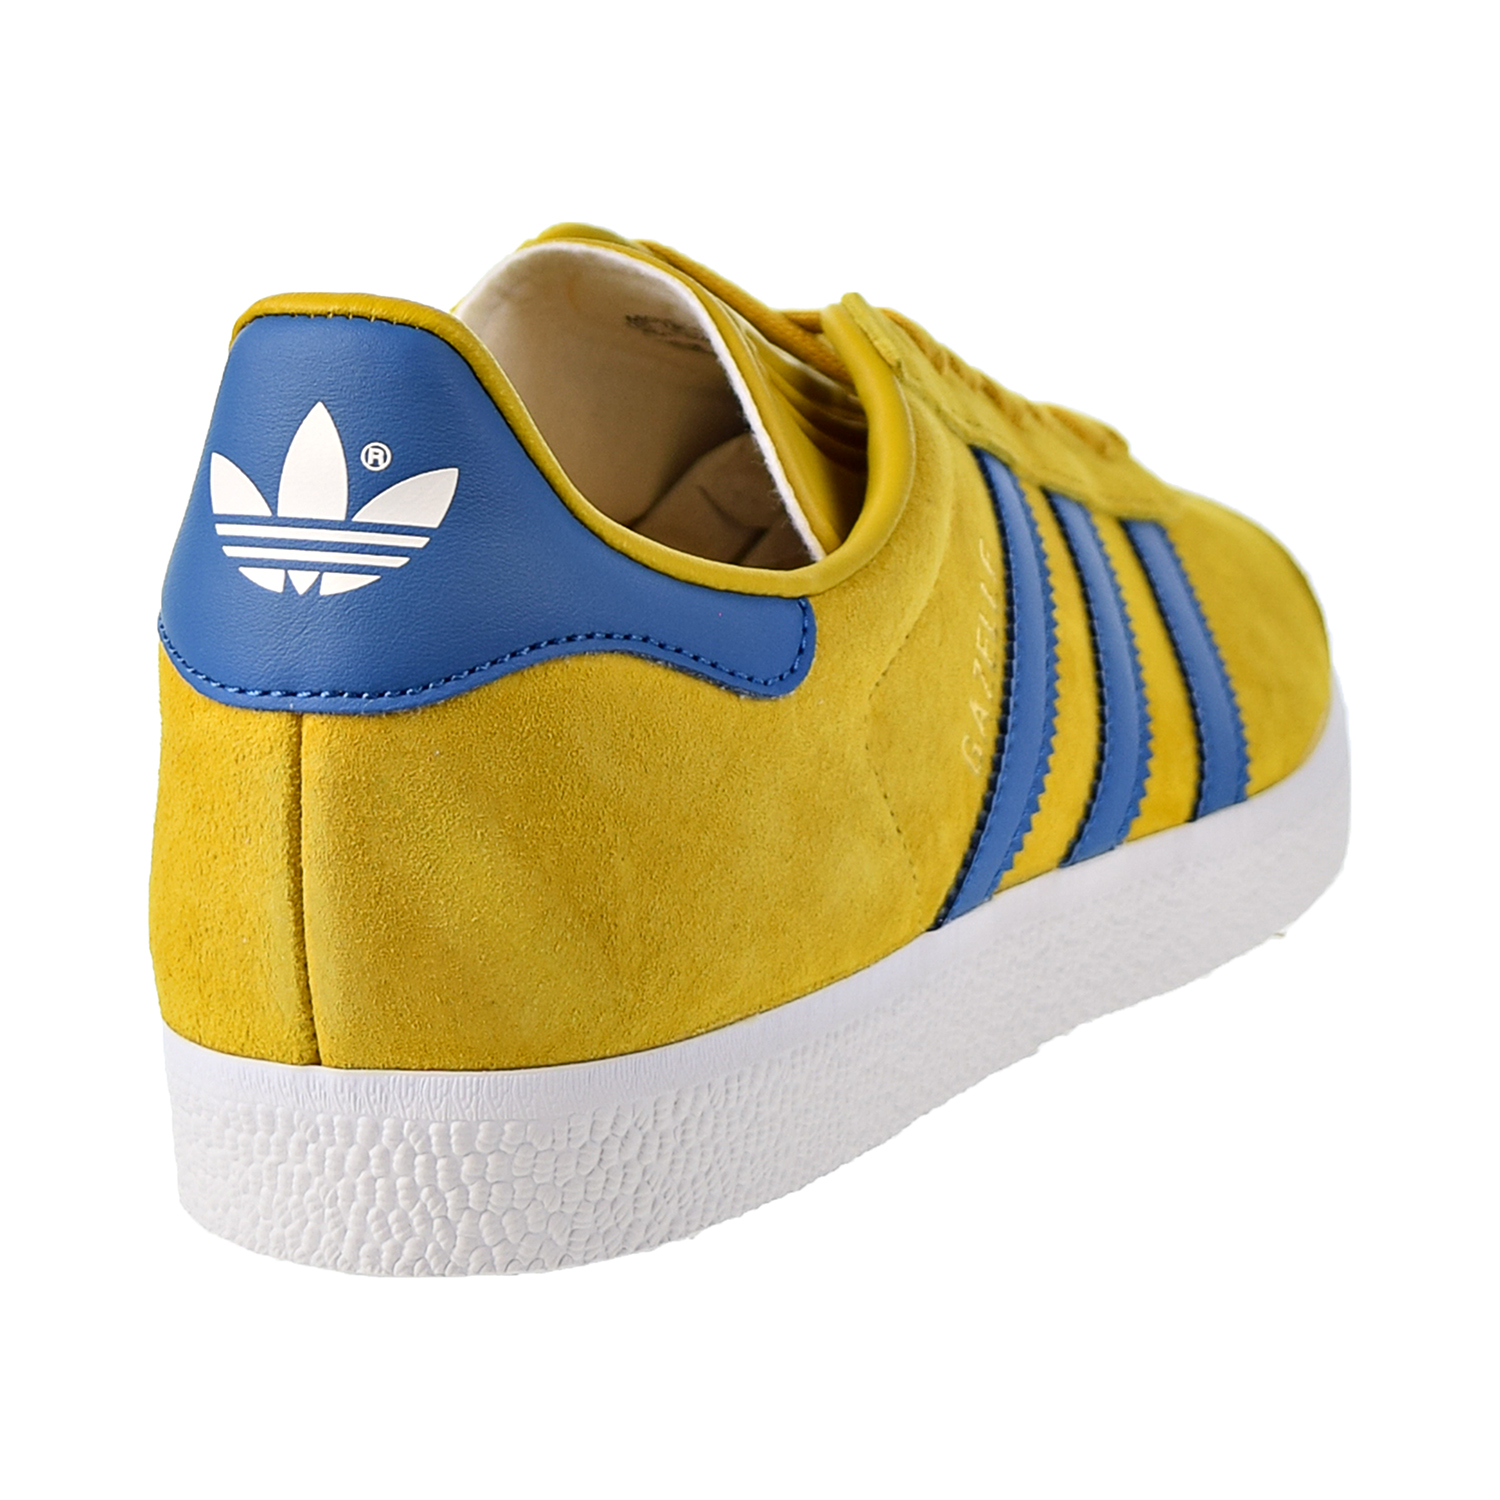 Adidas Gazelle Mens Shoes ST Nomad Yellow-Core Blue-Footwear White ...